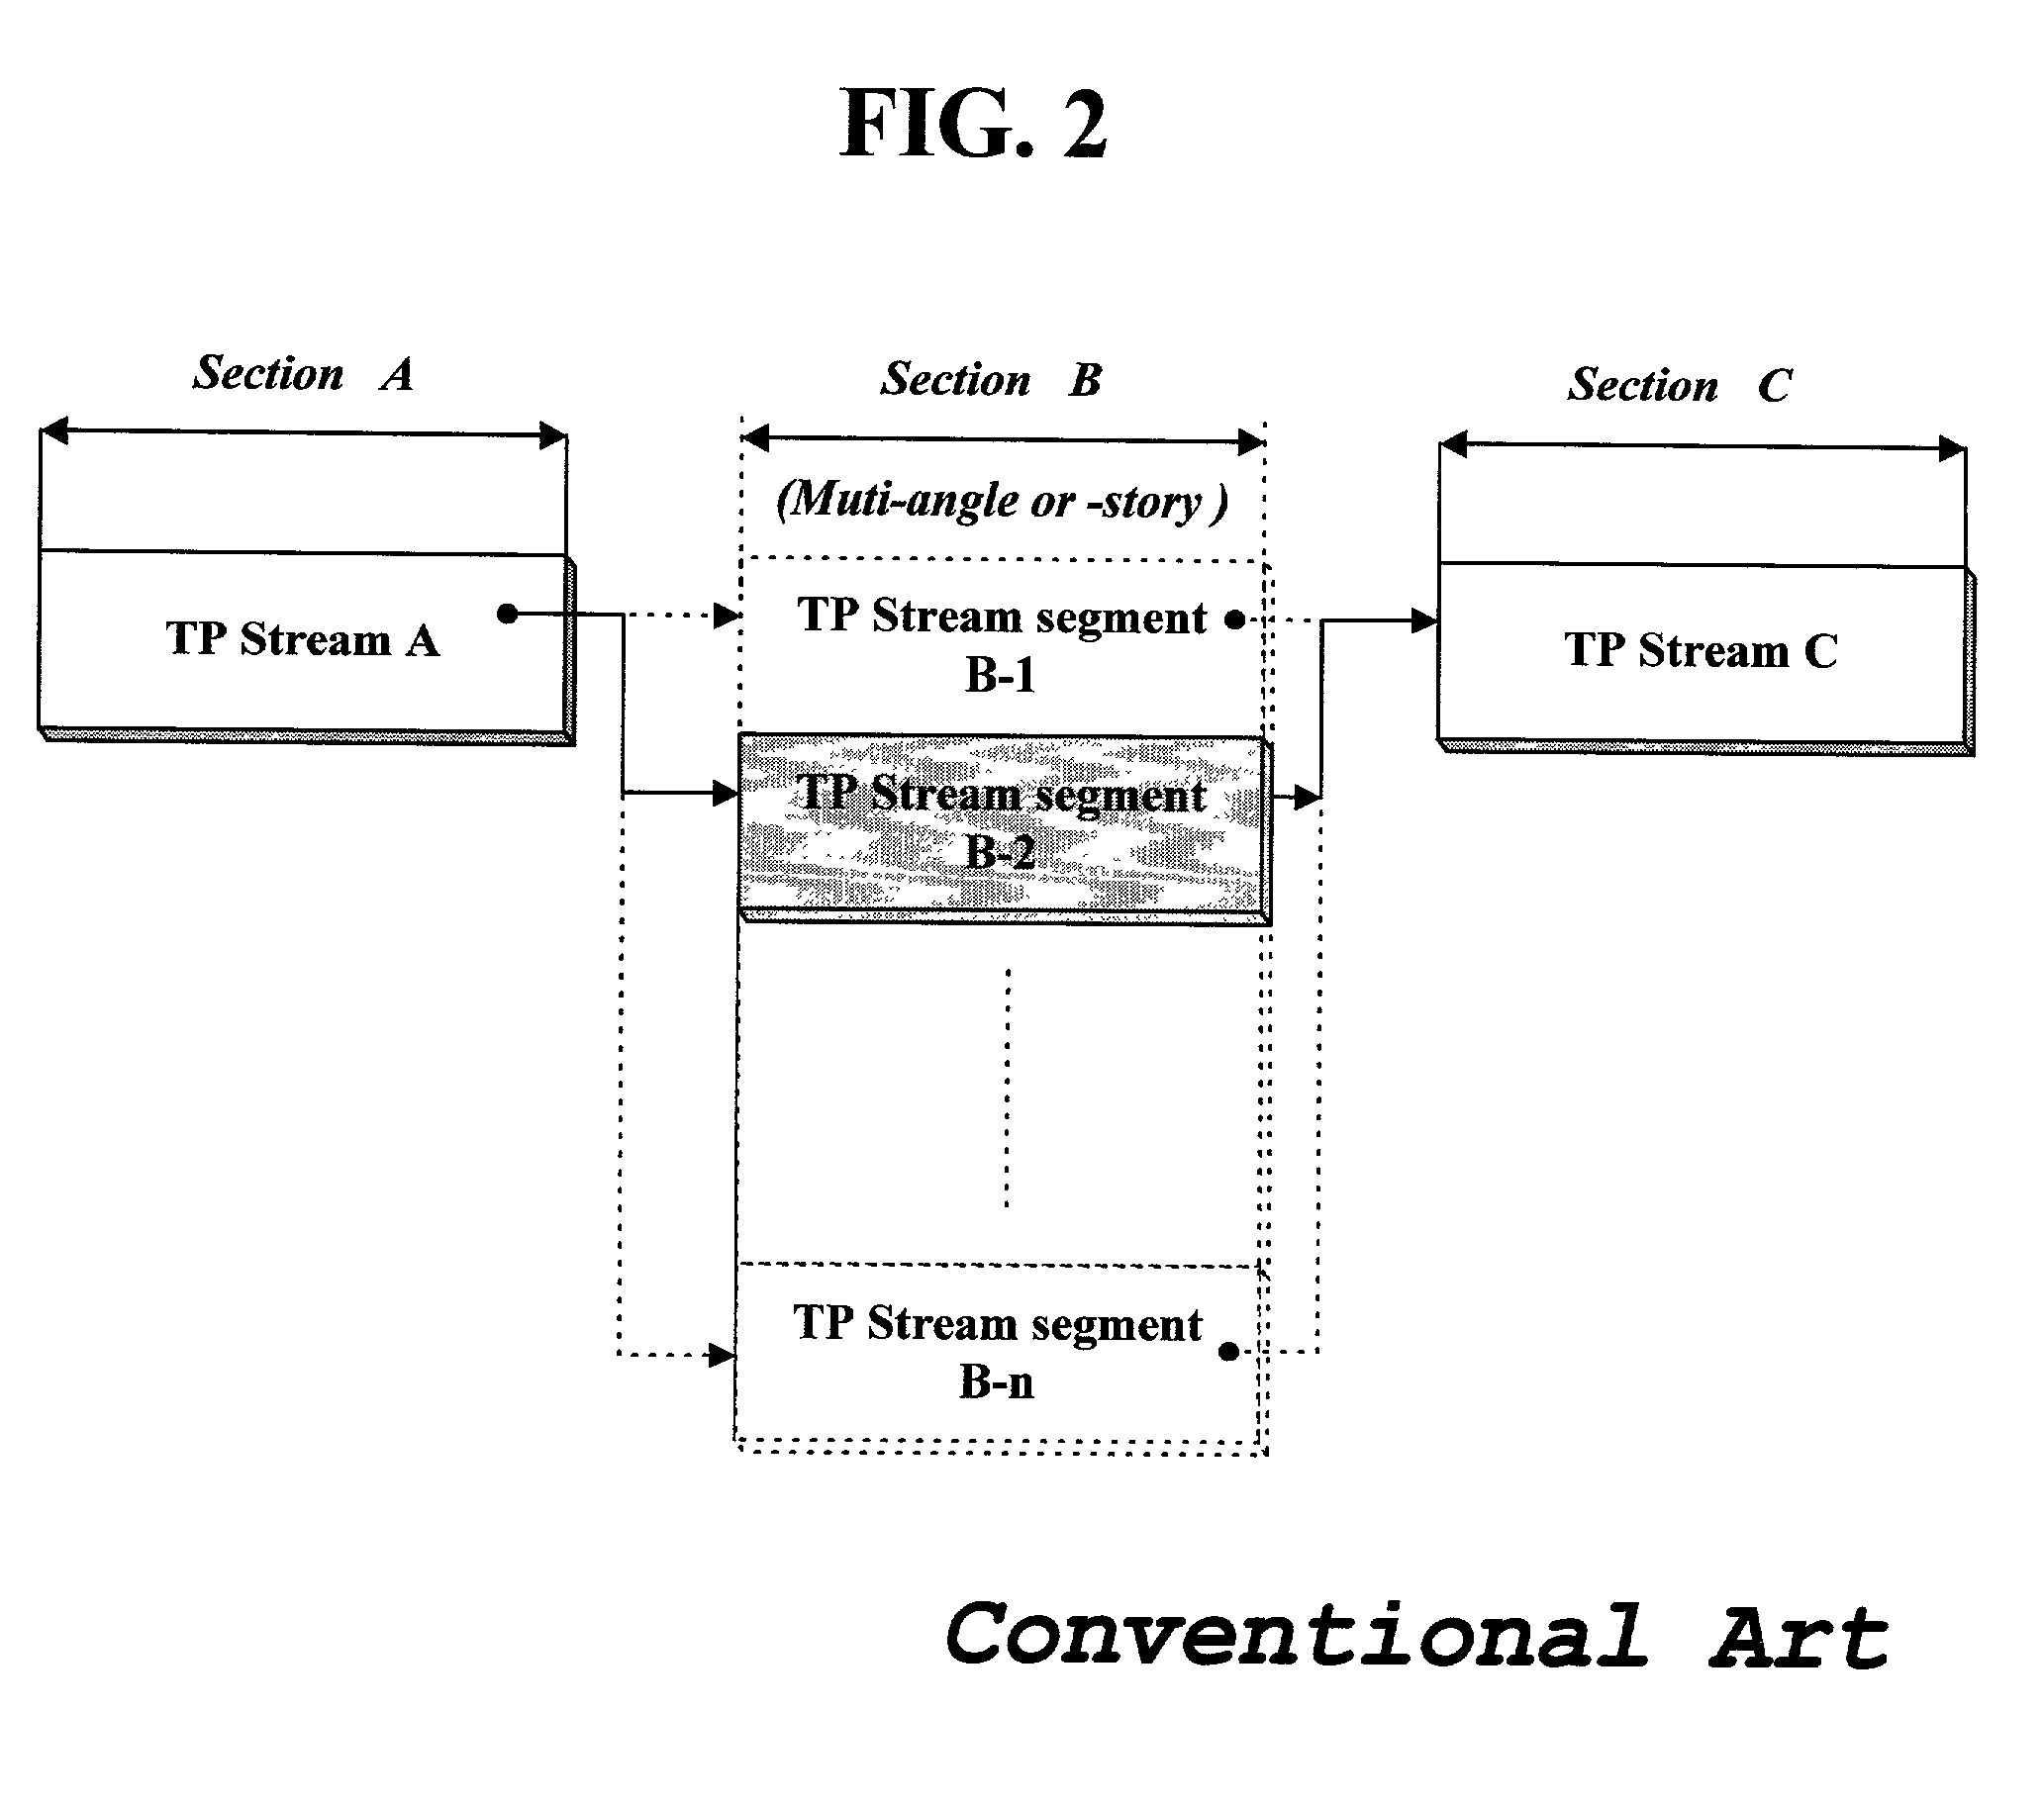 Method of transmitting data stream including multi-path sections